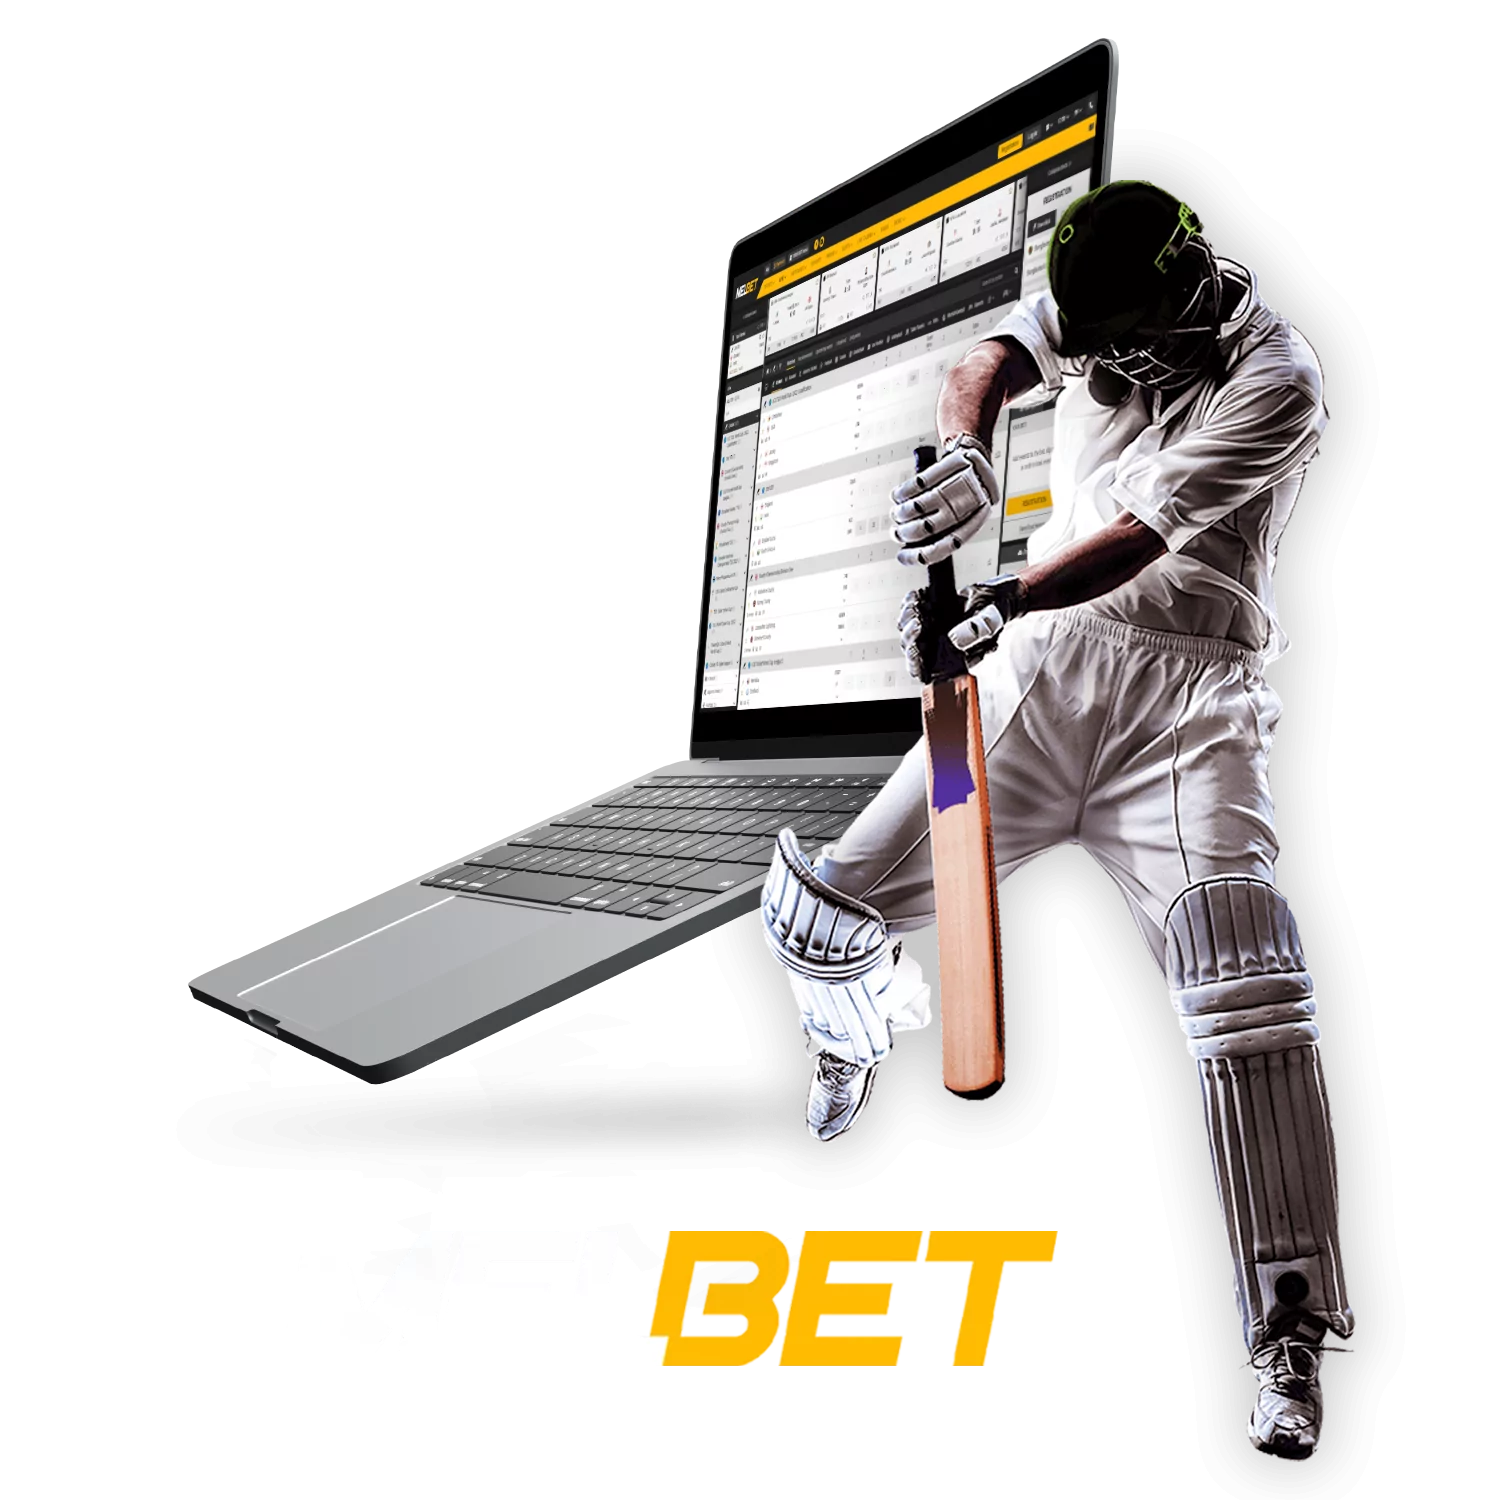 Learn how to use your Melbet account for betting on cricket.